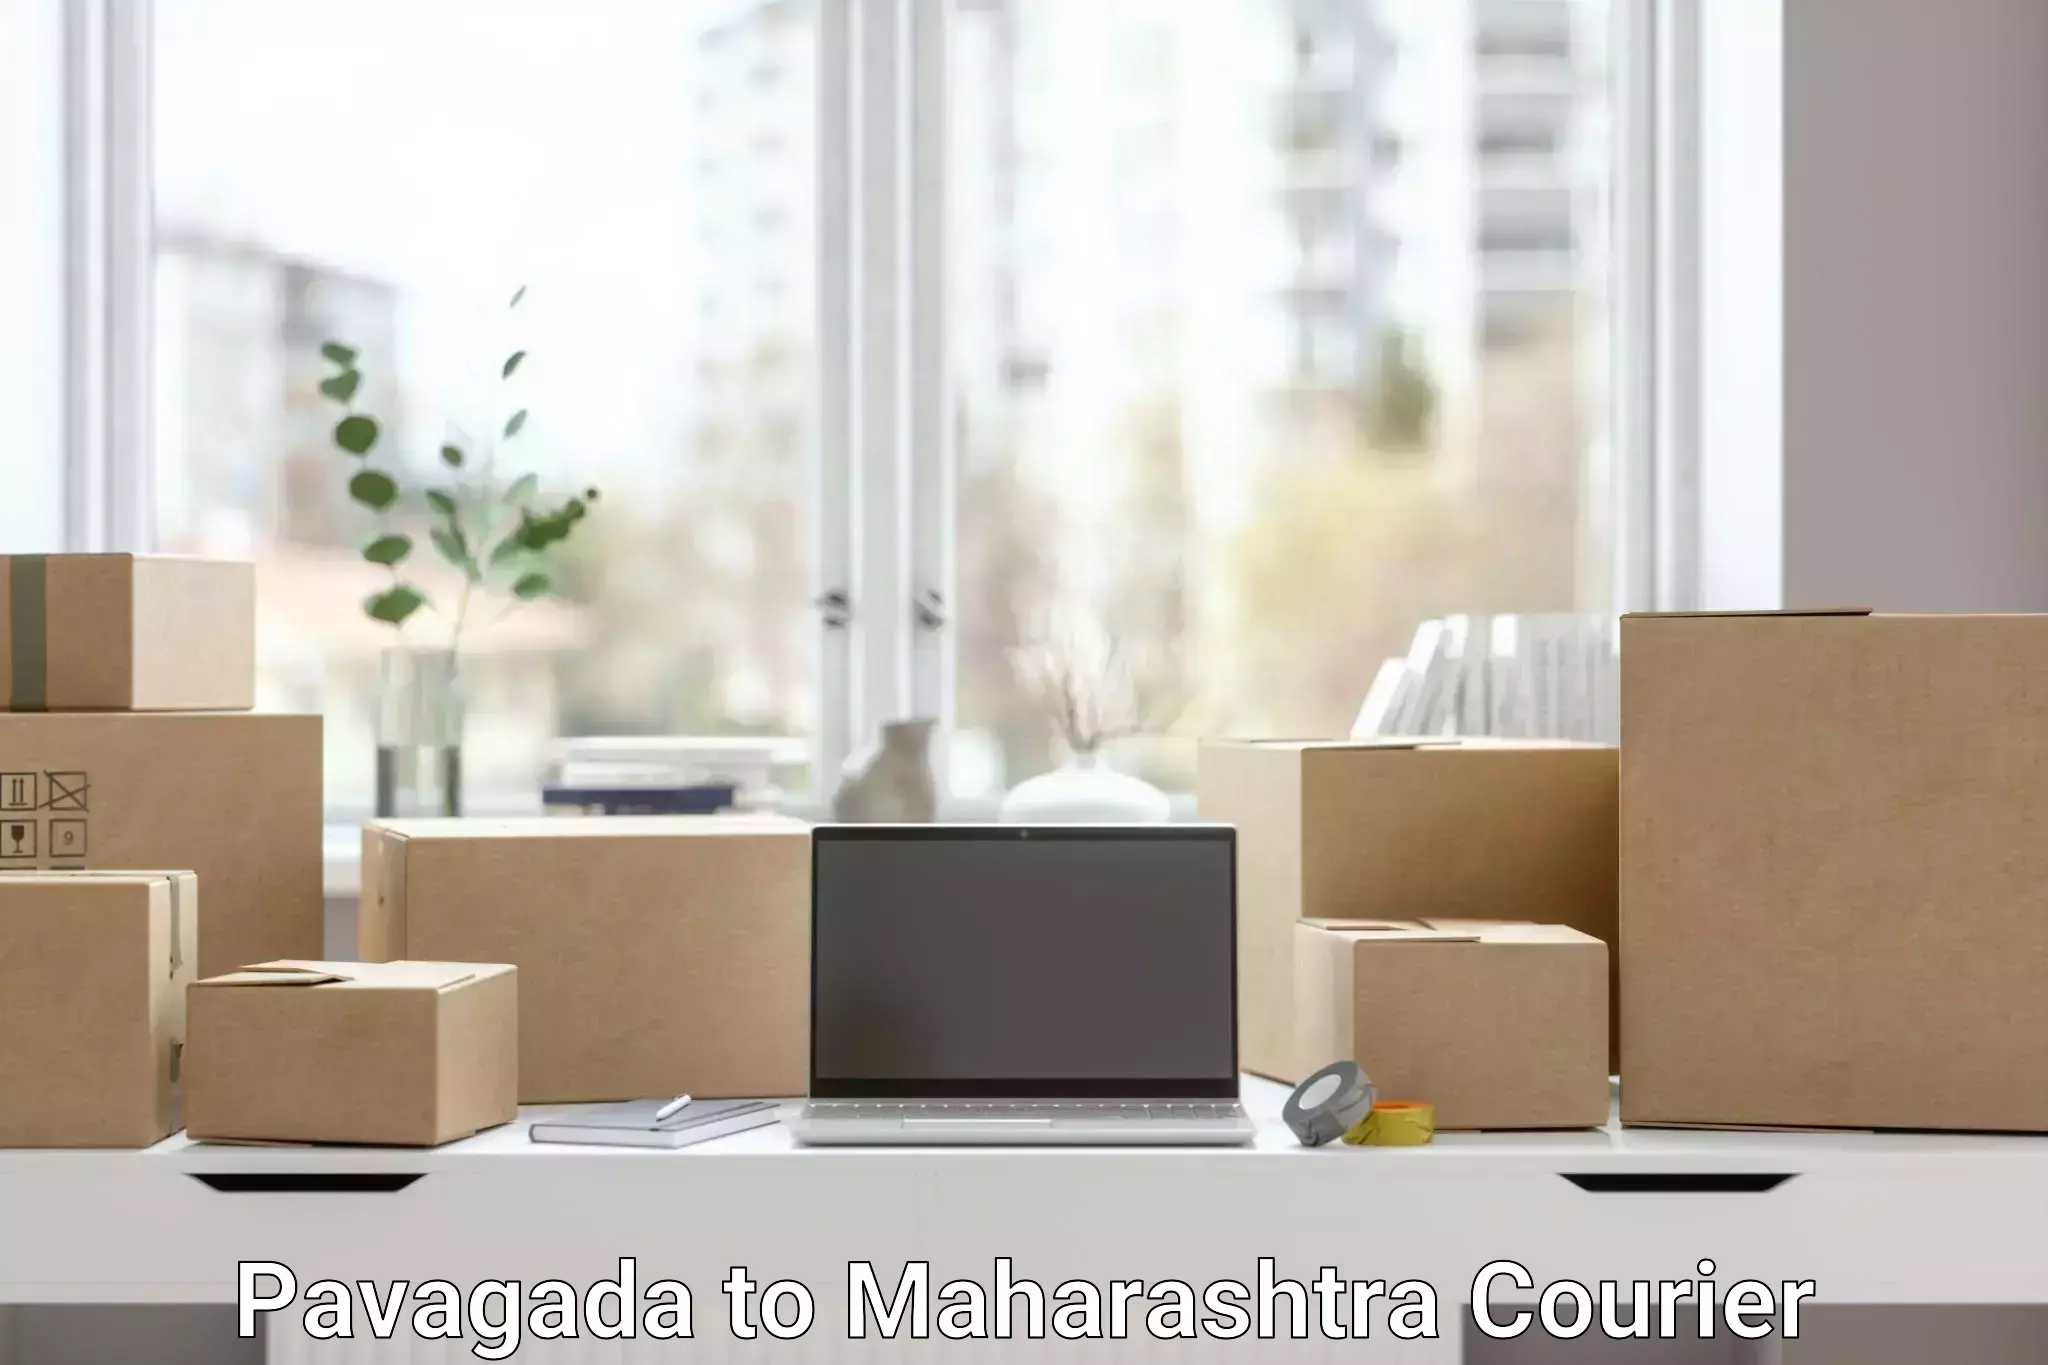 Courier service partnerships Pavagada to Pune